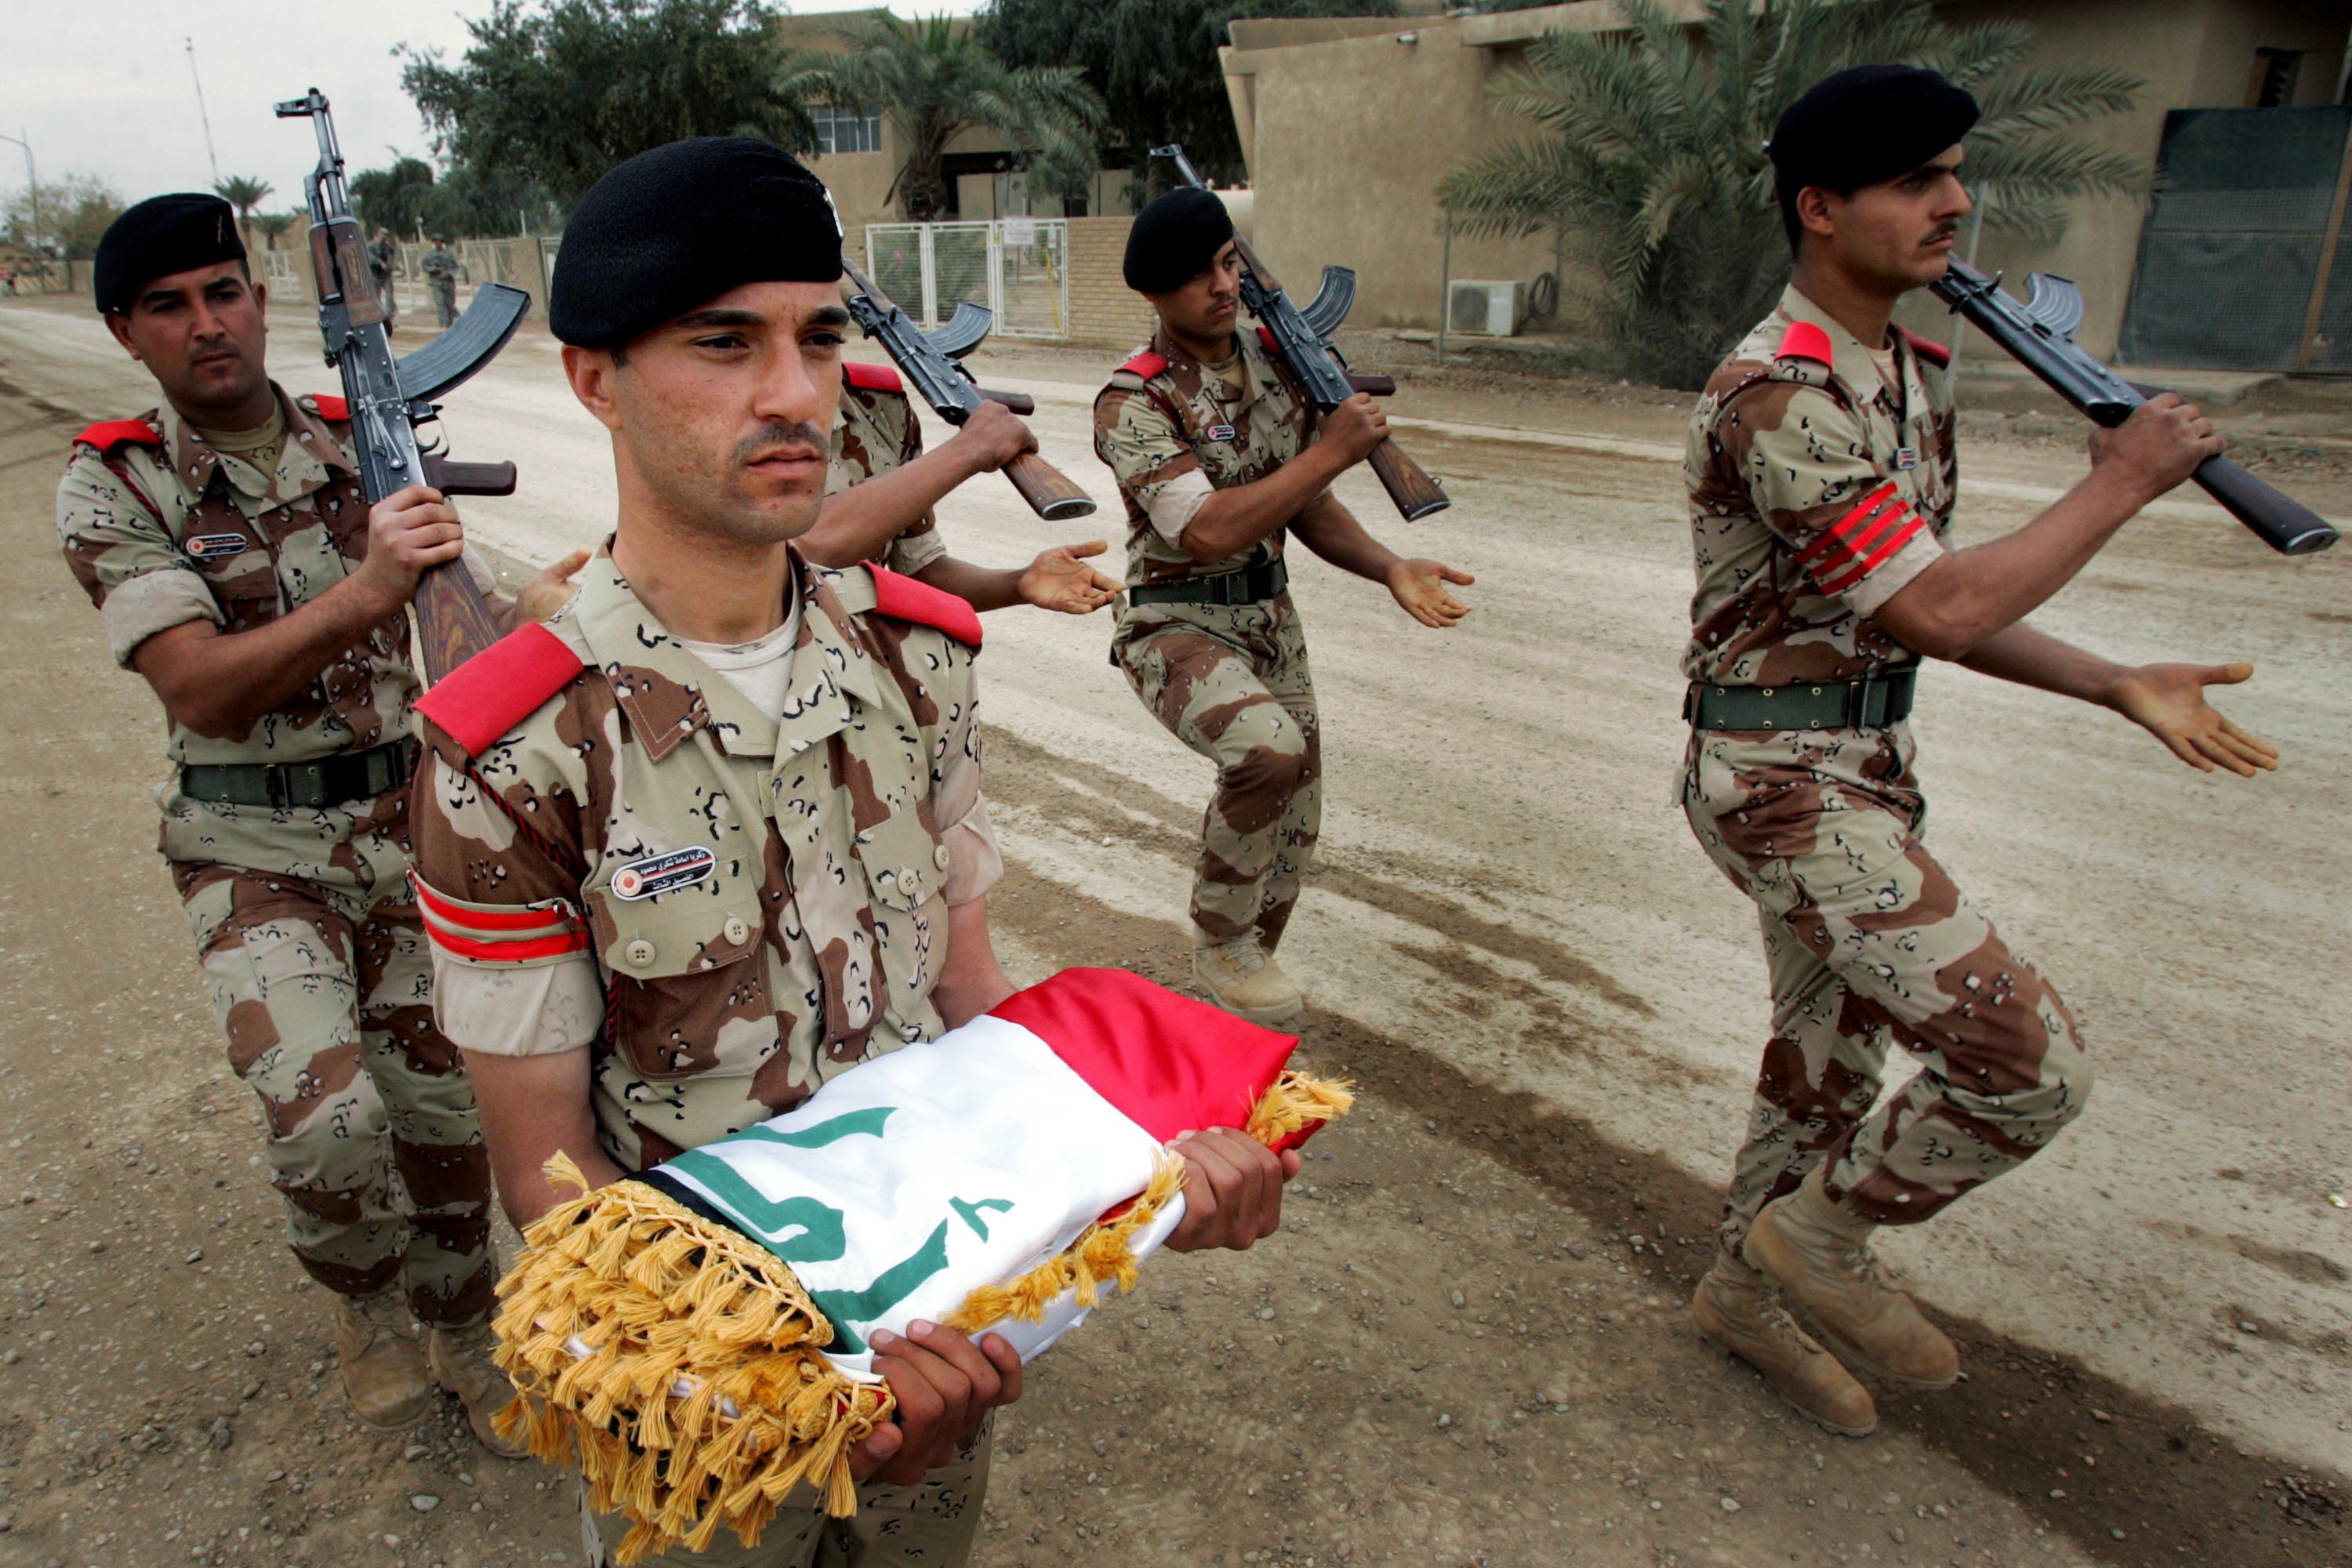 Wathiq Khuzaie/Getty Images. BAGHDAD, IRAQ, MARCH 31: Iraqi Army soldiers march while carrying a flag during a handover ceremony at Camp Rustimiyah March 31, 2009 in Baghdad, Iraq. The U.S Army handed over the Rustimiyah military camp back to the Iraqi army , which houses the Iraqi Military Academy and is about seven square kilometers of terrain with 200 buildings, during the ceremony.